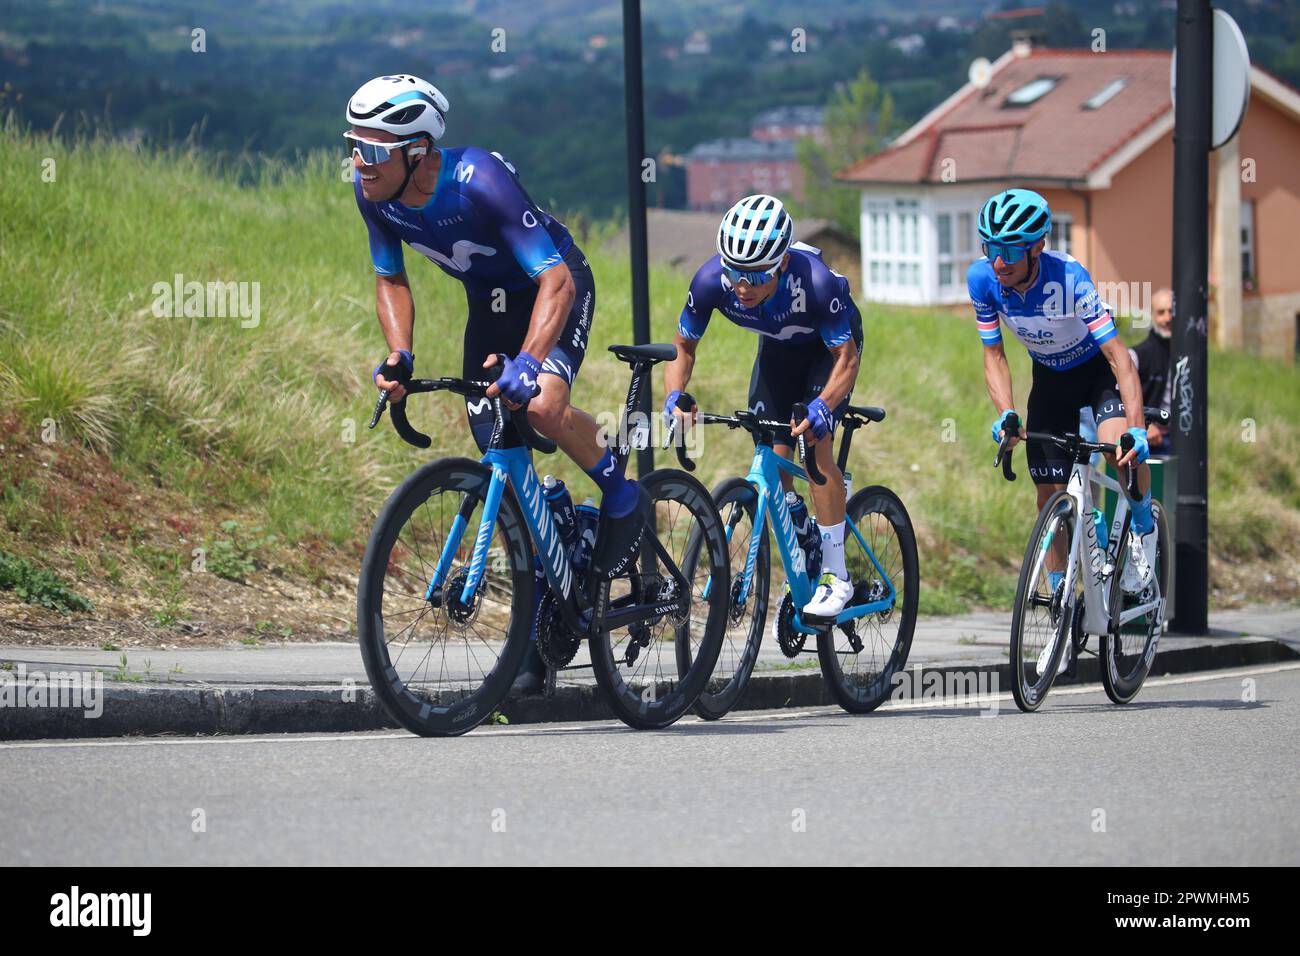 Oviedo, Spain. 30th Apr, 2023. Movistar Team rider Alberto Torres (L) followed by Einer Augusto Rubio (Movistar Team) and Lorenzo Fortunato (EOLO-Kometa, R) leading a group during the 3rd stage of the Vuelta a Asturias 2023 between Cangas del Narcea and Oviedo, on April 30, 2023, in Oviedo, Spain. (Photo by Alberto Brevers/Pacific Press) Credit: Pacific Press Media Production Corp./Alamy Live News Stock Photo